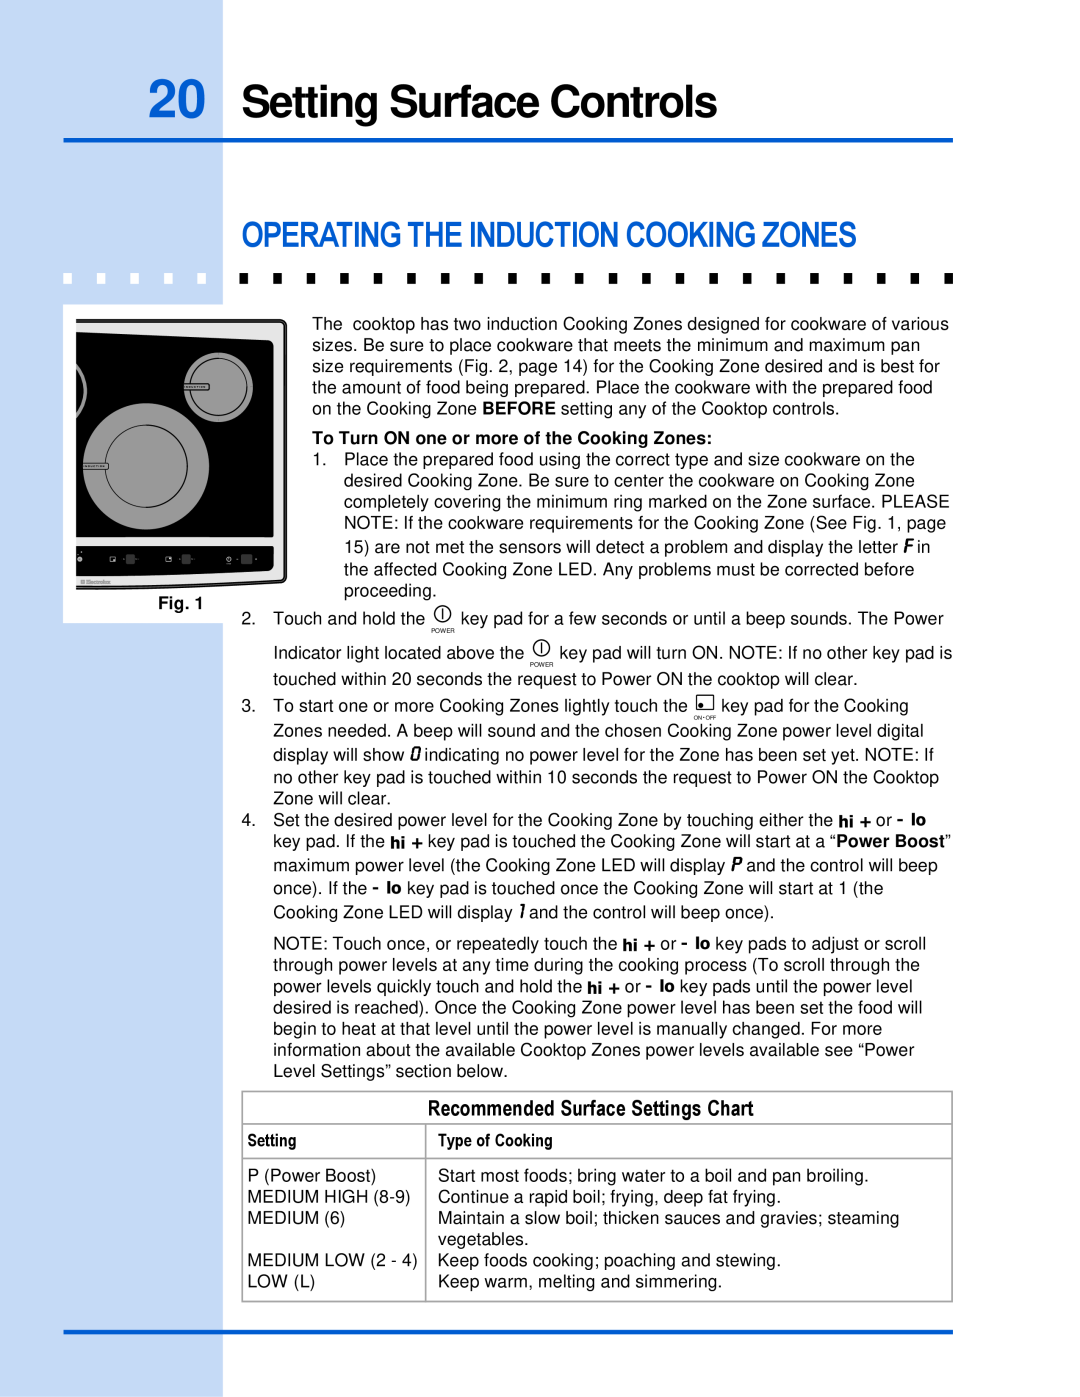 Electrolux 318 203 603 (0709) Setting Surface Controls, Operating The Induction Cooking Zones, proceeding, Type of Cooking 